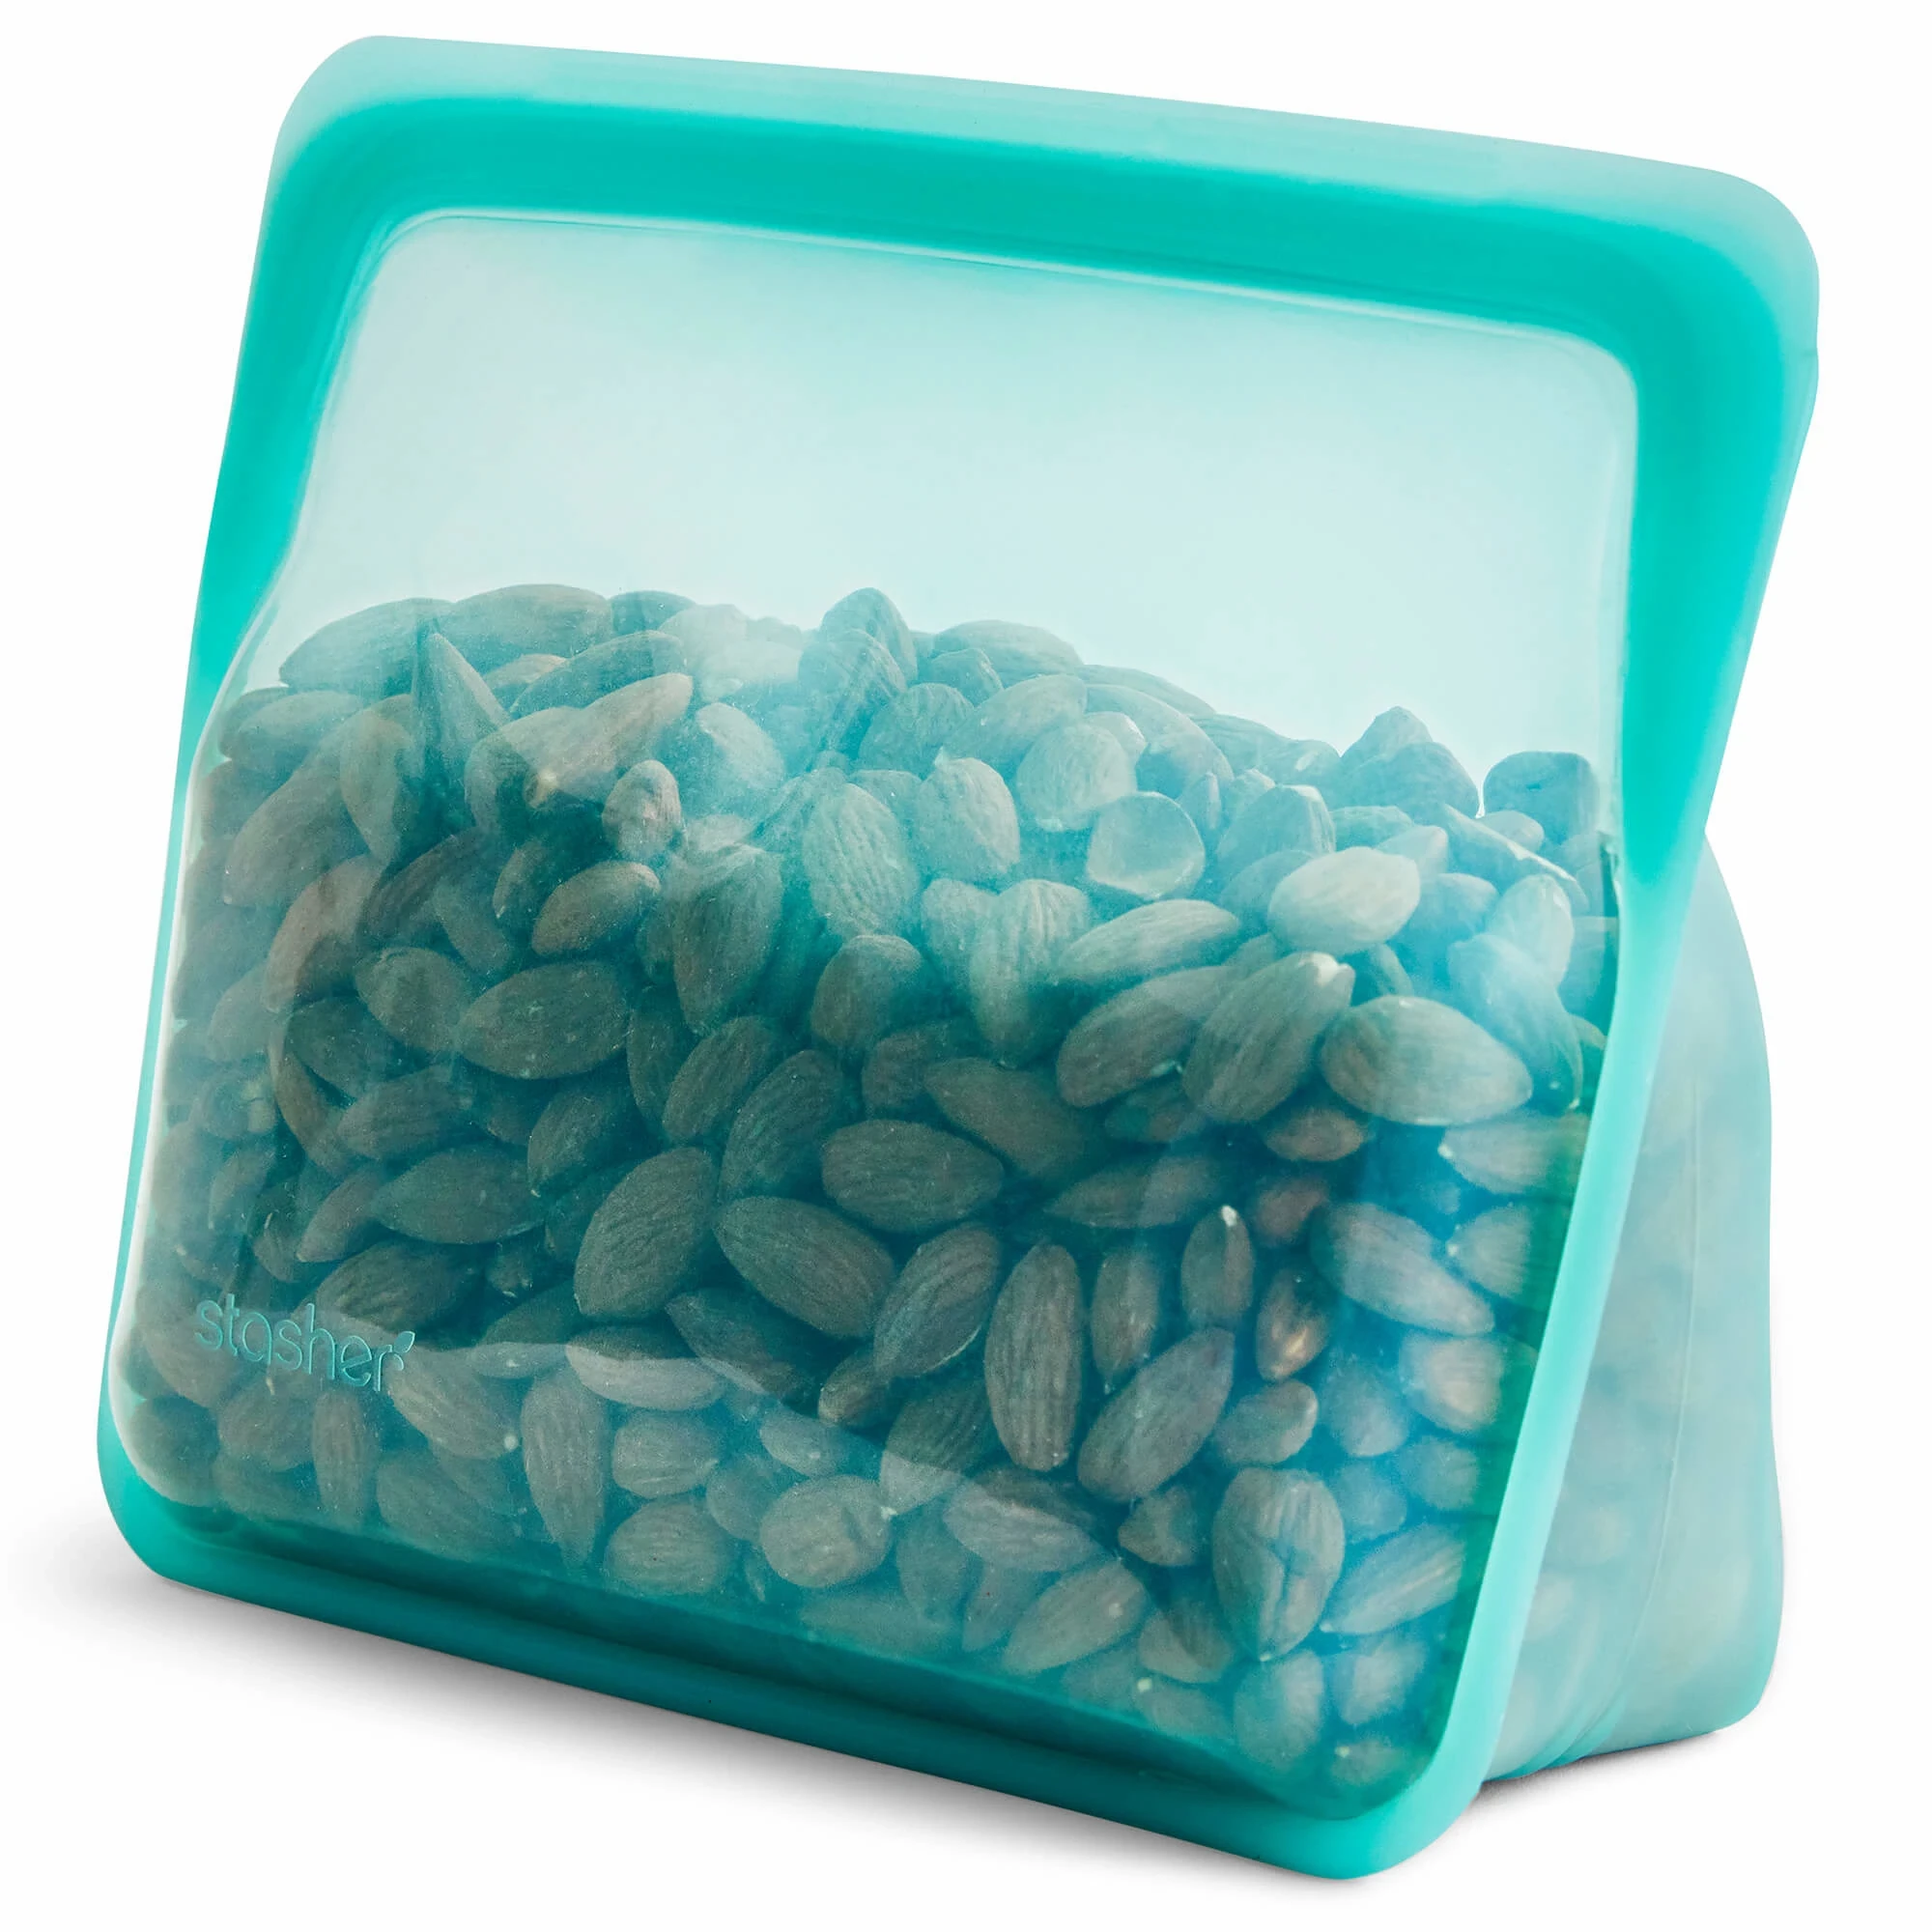 Angled view of Aqua Stasher Stand-Up Mid Bag filled with almonds